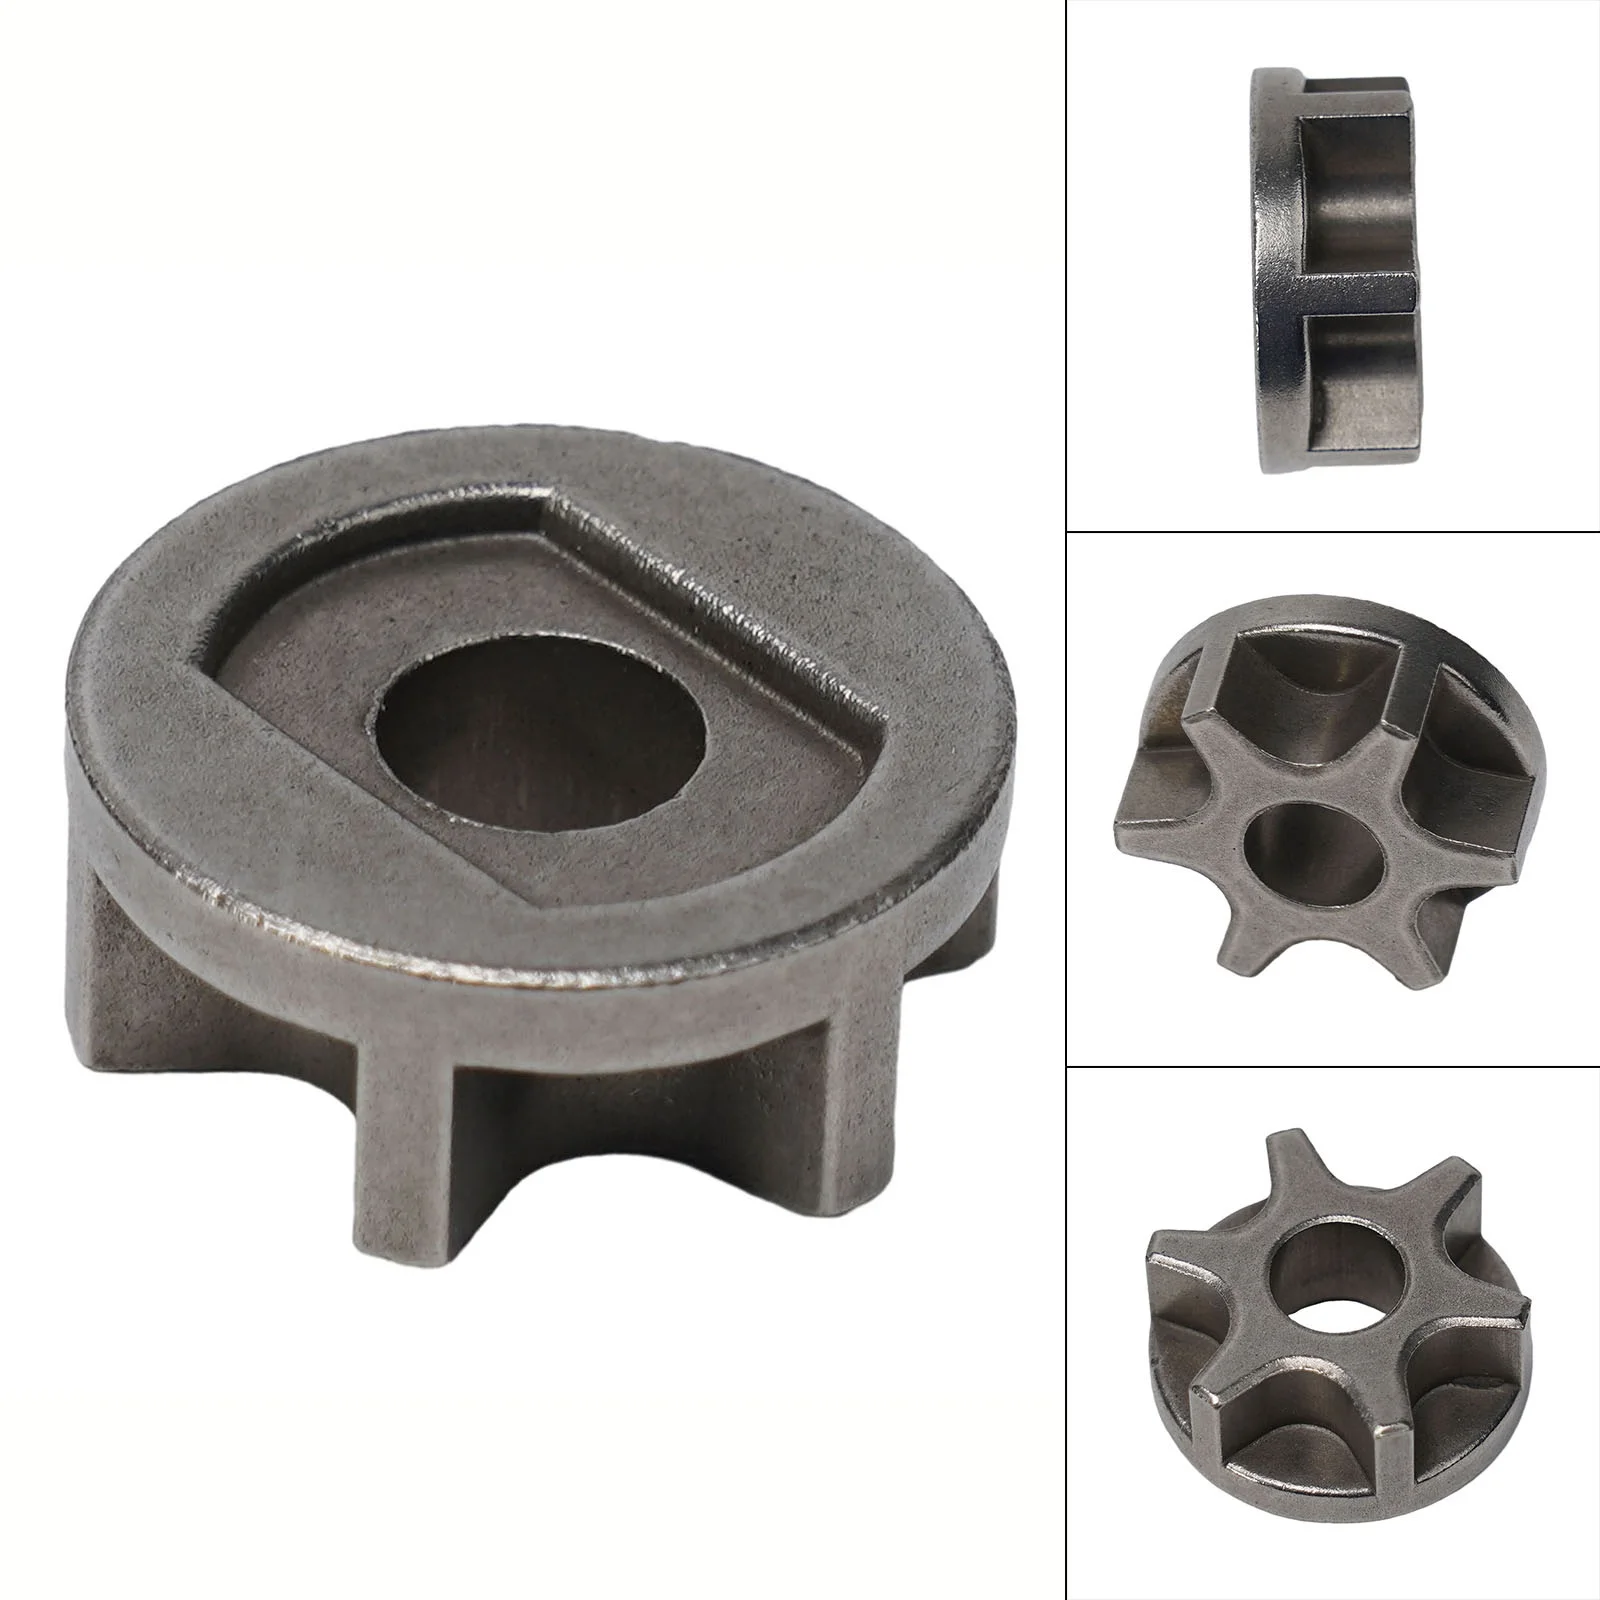 For M10-100 Angle Grinder Accessory Angle Grinder Gear Durable High Speed Steel Chain Saw M10 M14 M16 High Quality